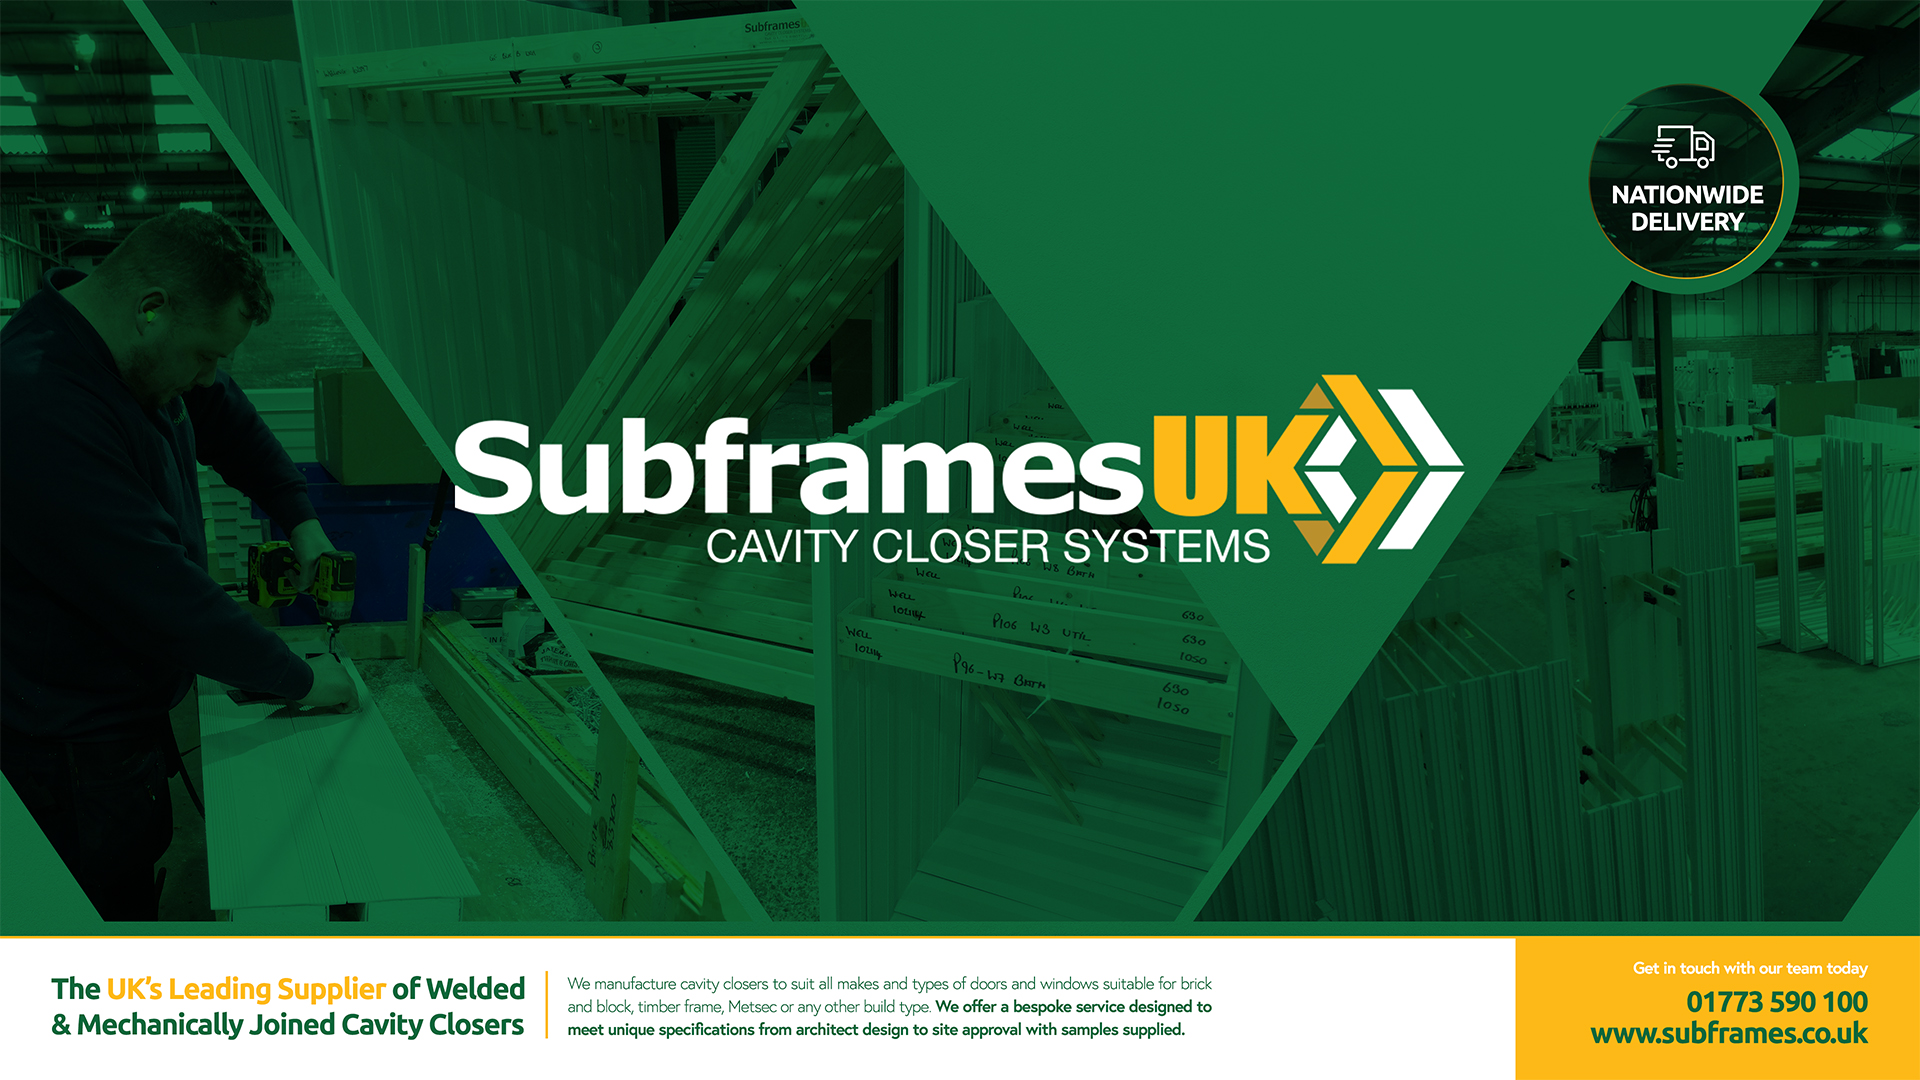 Subframes banner with logo and info about the UK's leading cavity and window formers company.